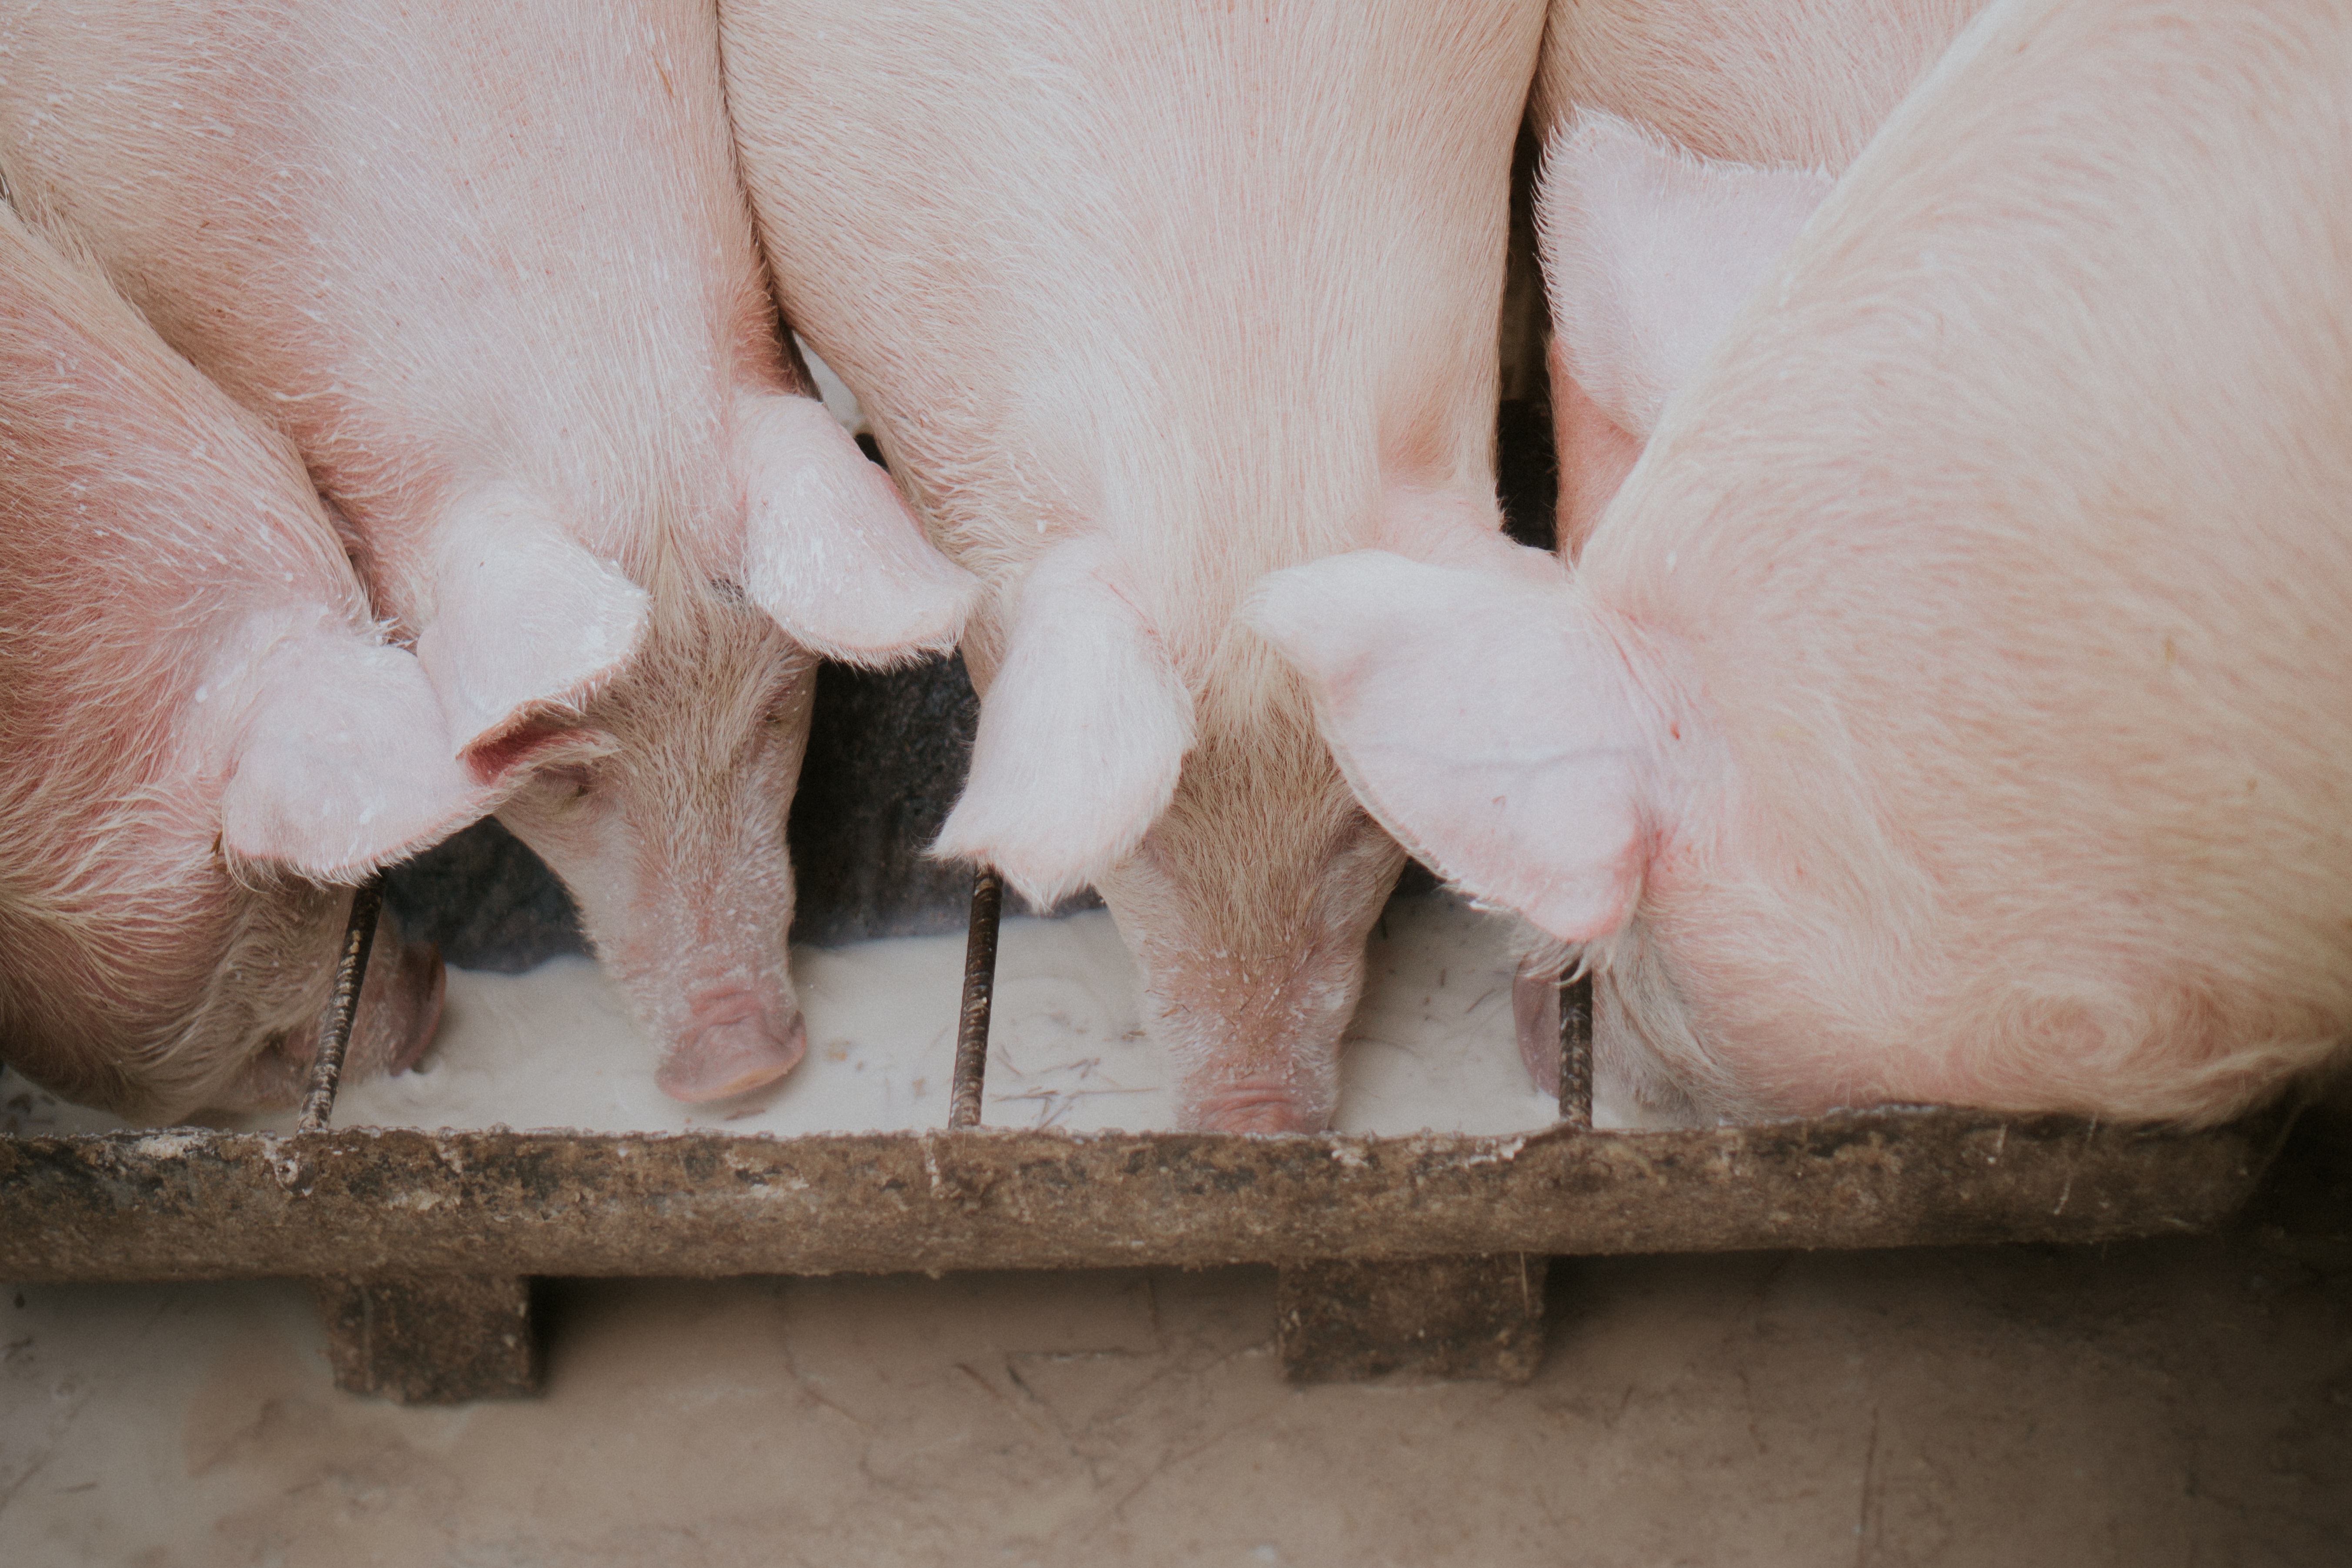 Group of pigs eating in a circle.